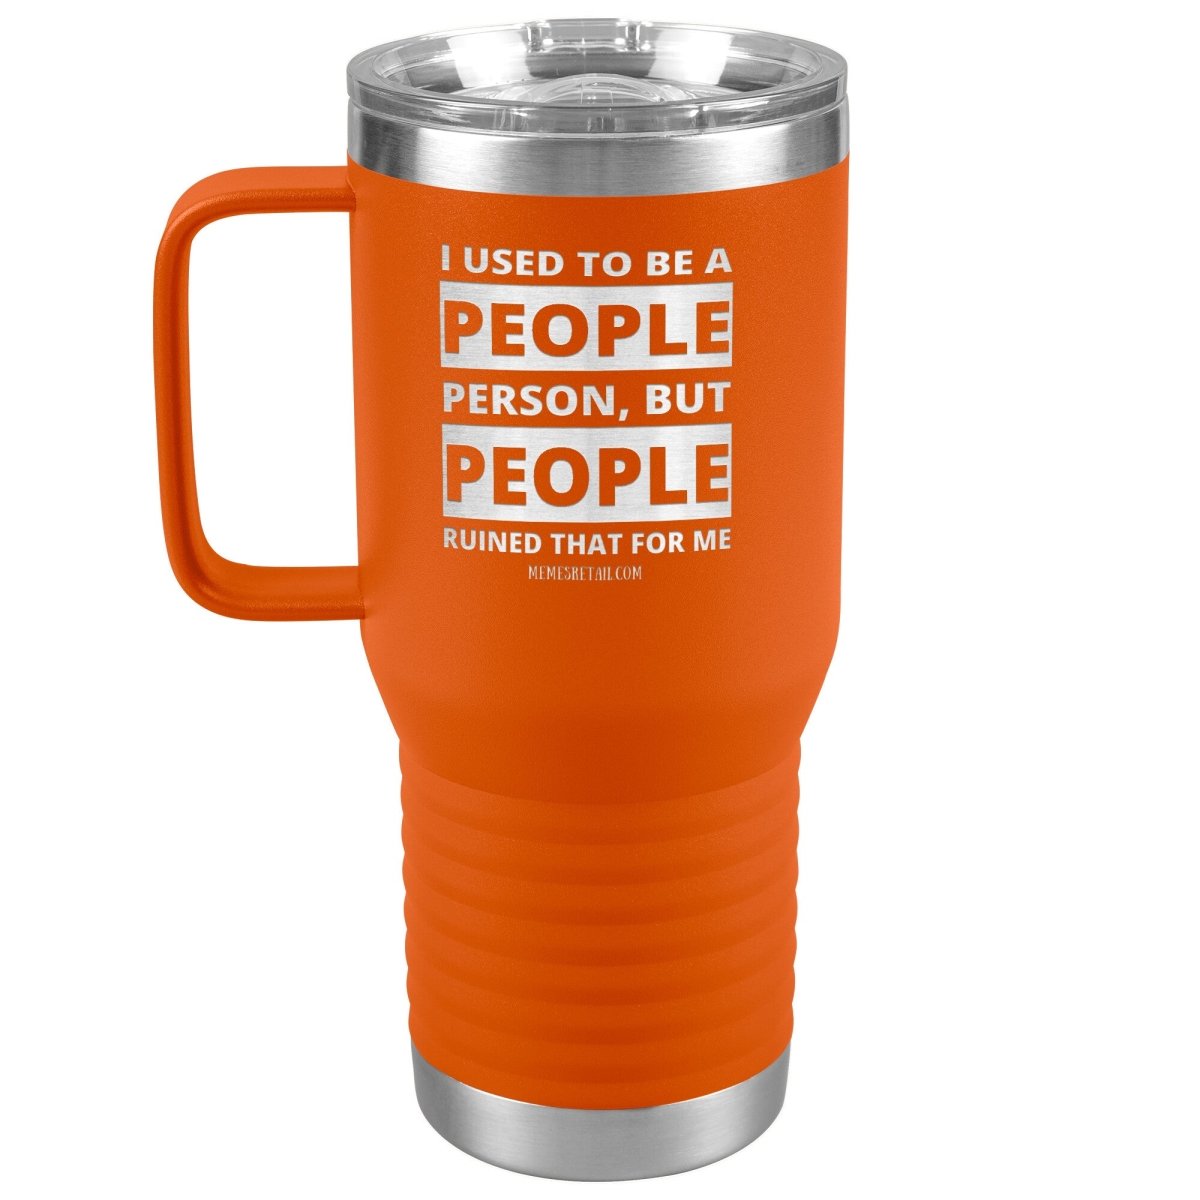 I Used To Be A People Person, But People Ruined That For Me Tumblers, 20oz Travel Tumbler / Orange - MemesRetail.com